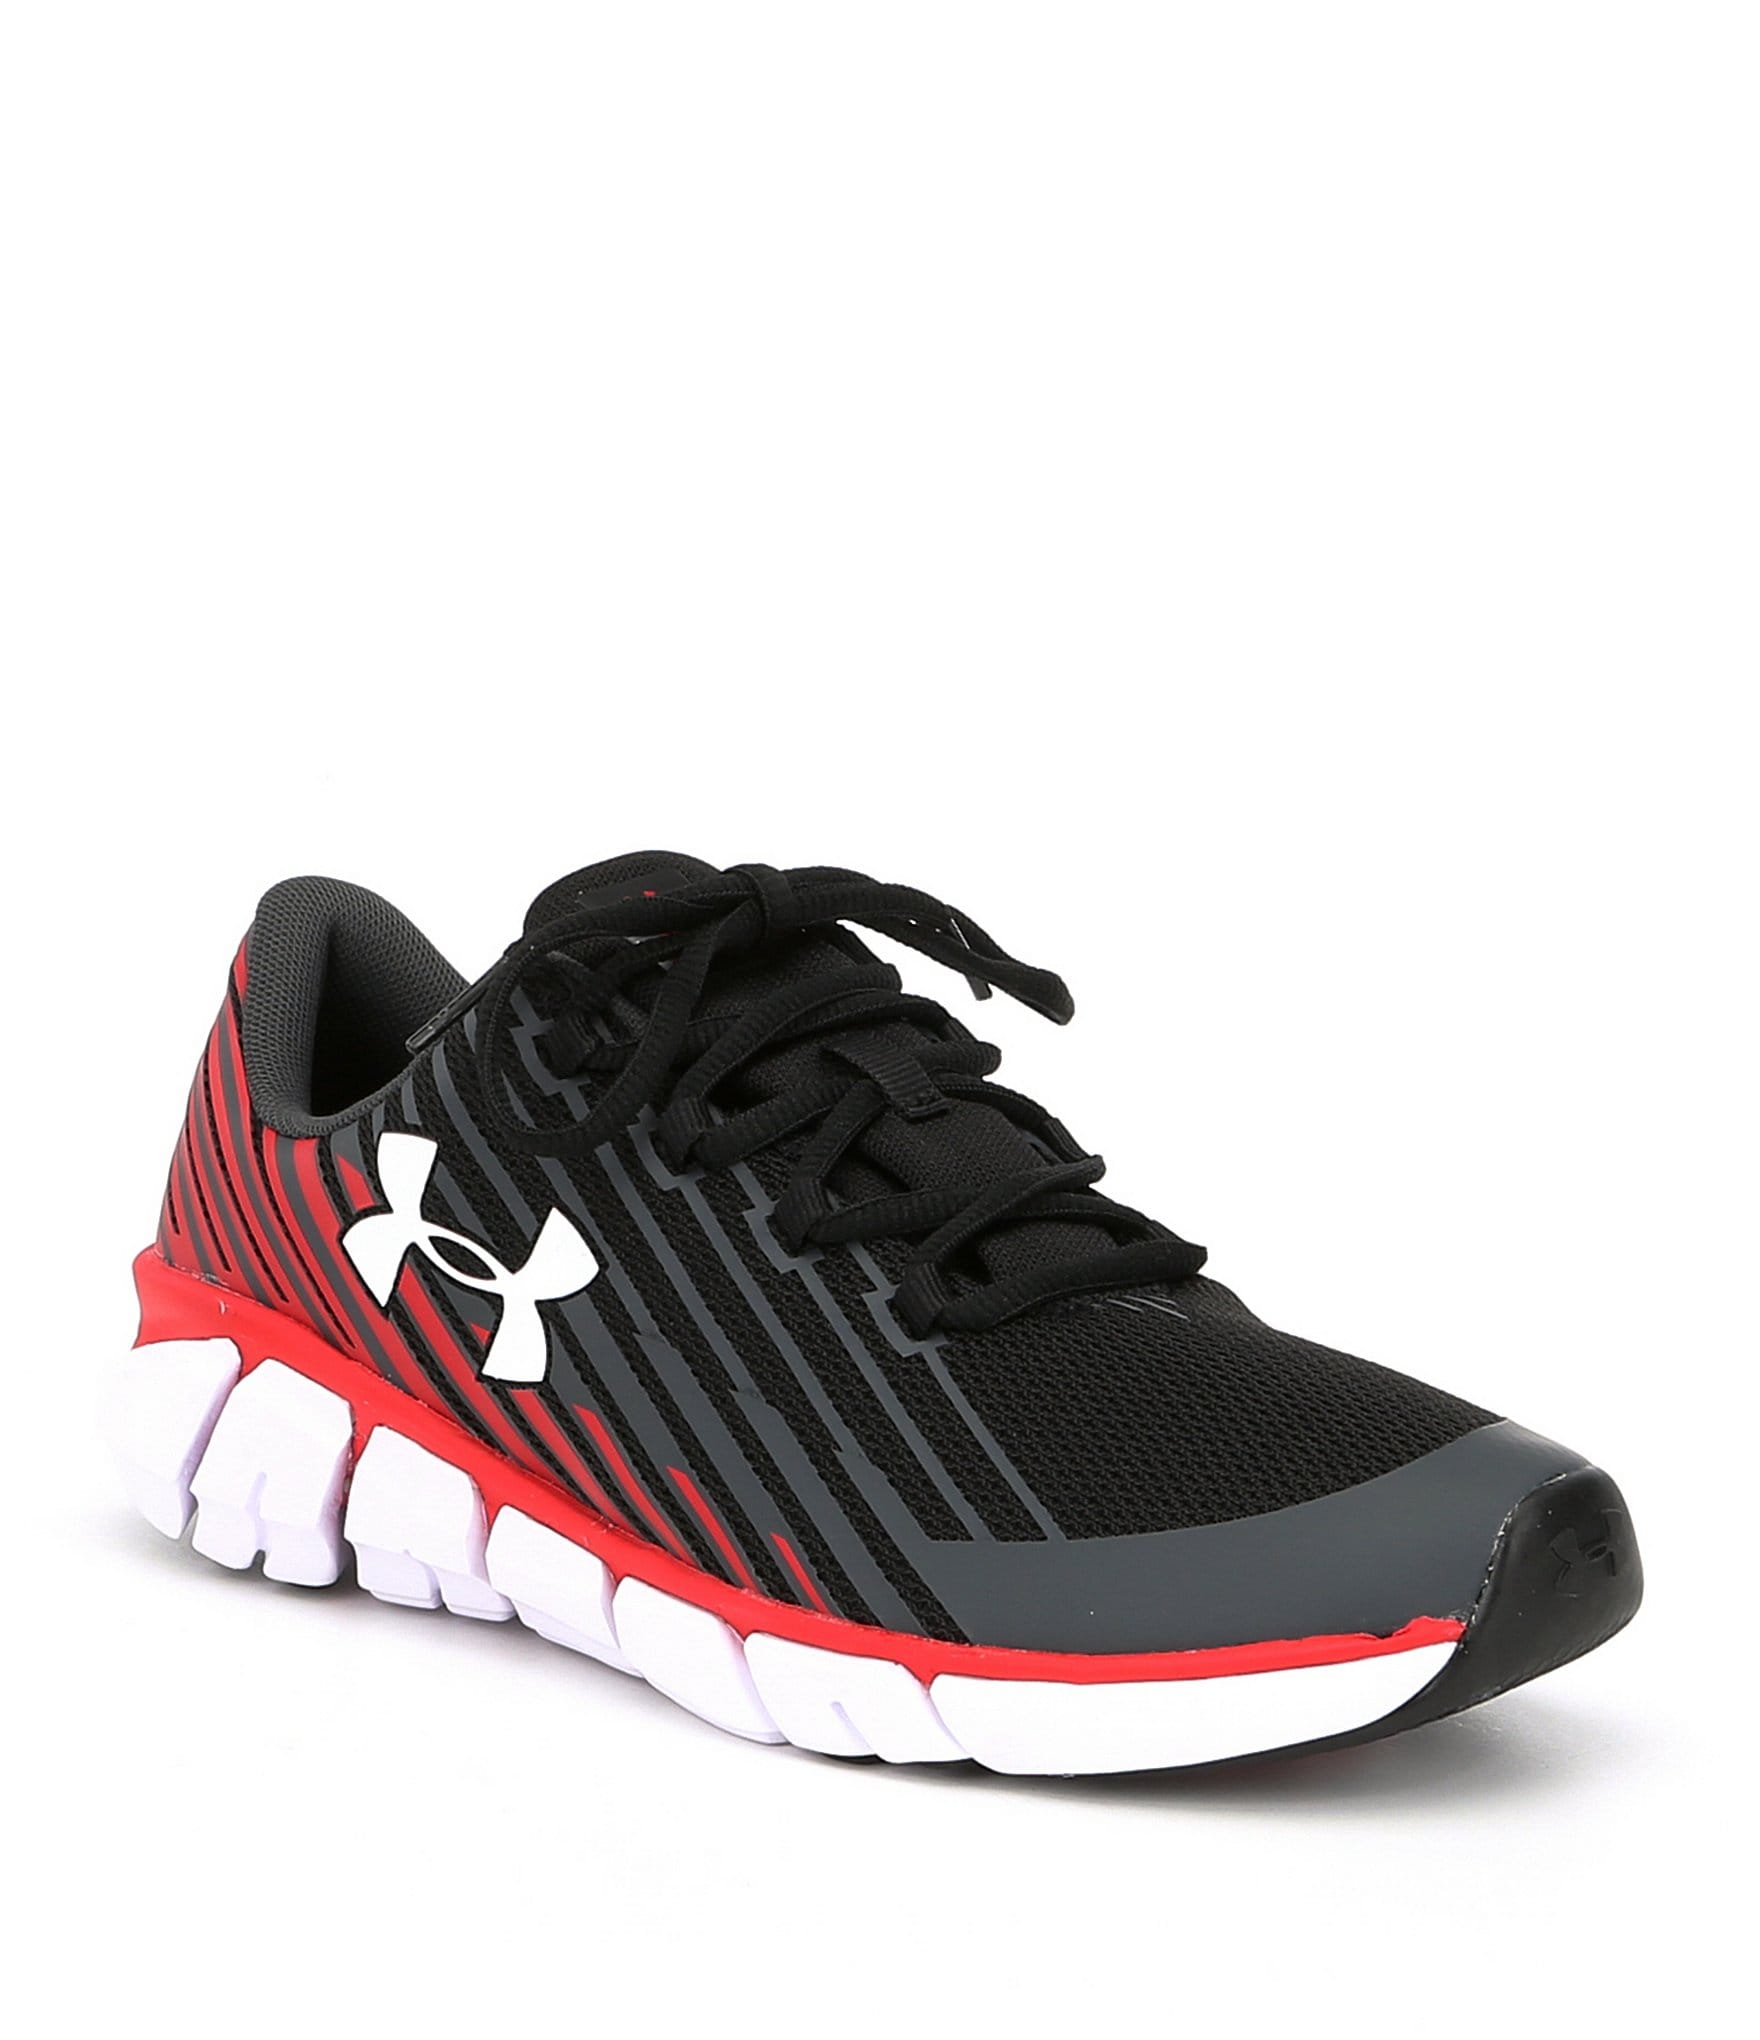 Cheap under armor dress shoes Buy 